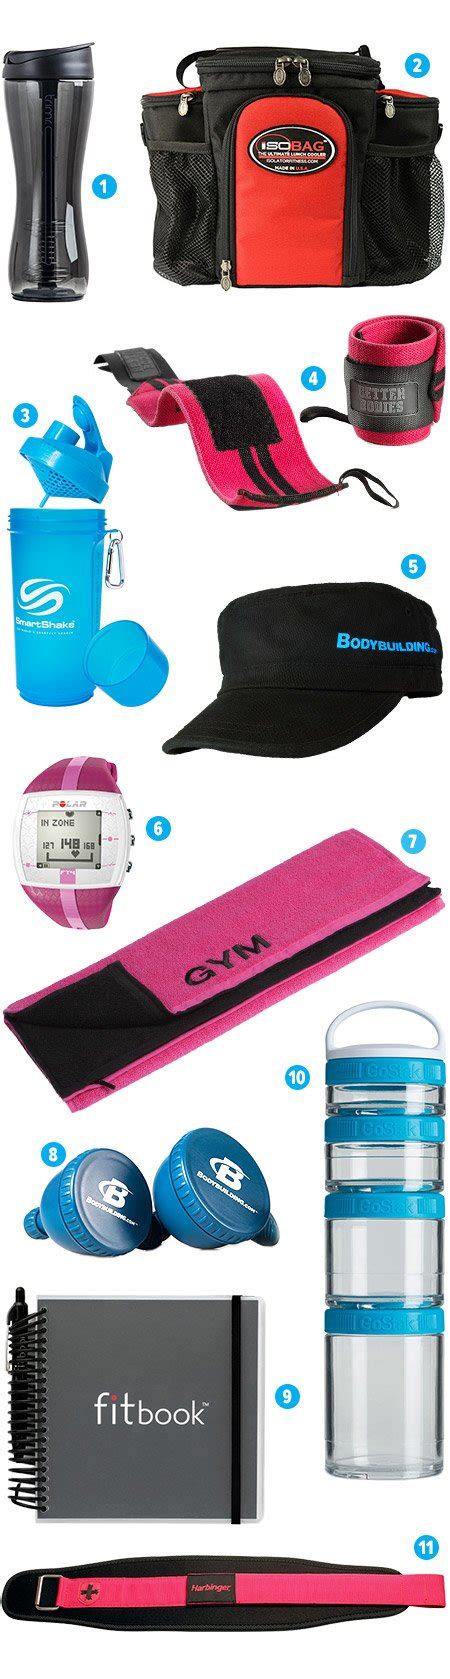 I hope you found the best fitness gifts for her on this list. Best Fitness Accessories For Women - 2014 Holiday Fit Gift ...